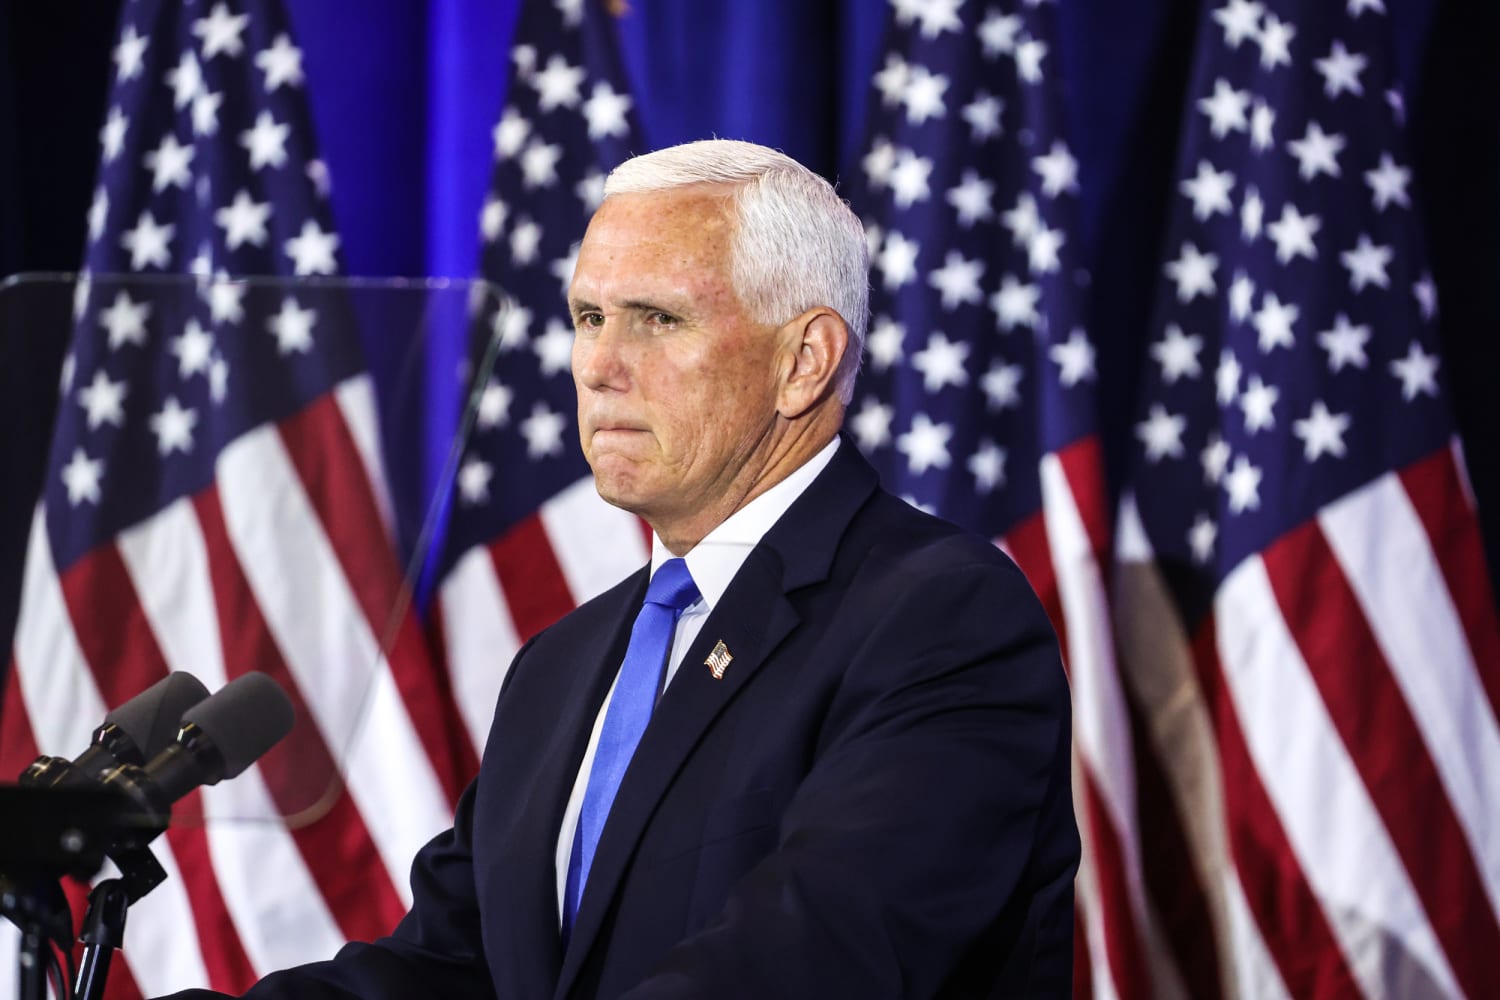 Pro-Pence super PAC highlights Jan. 6 attack, hits Trump in first TV ad